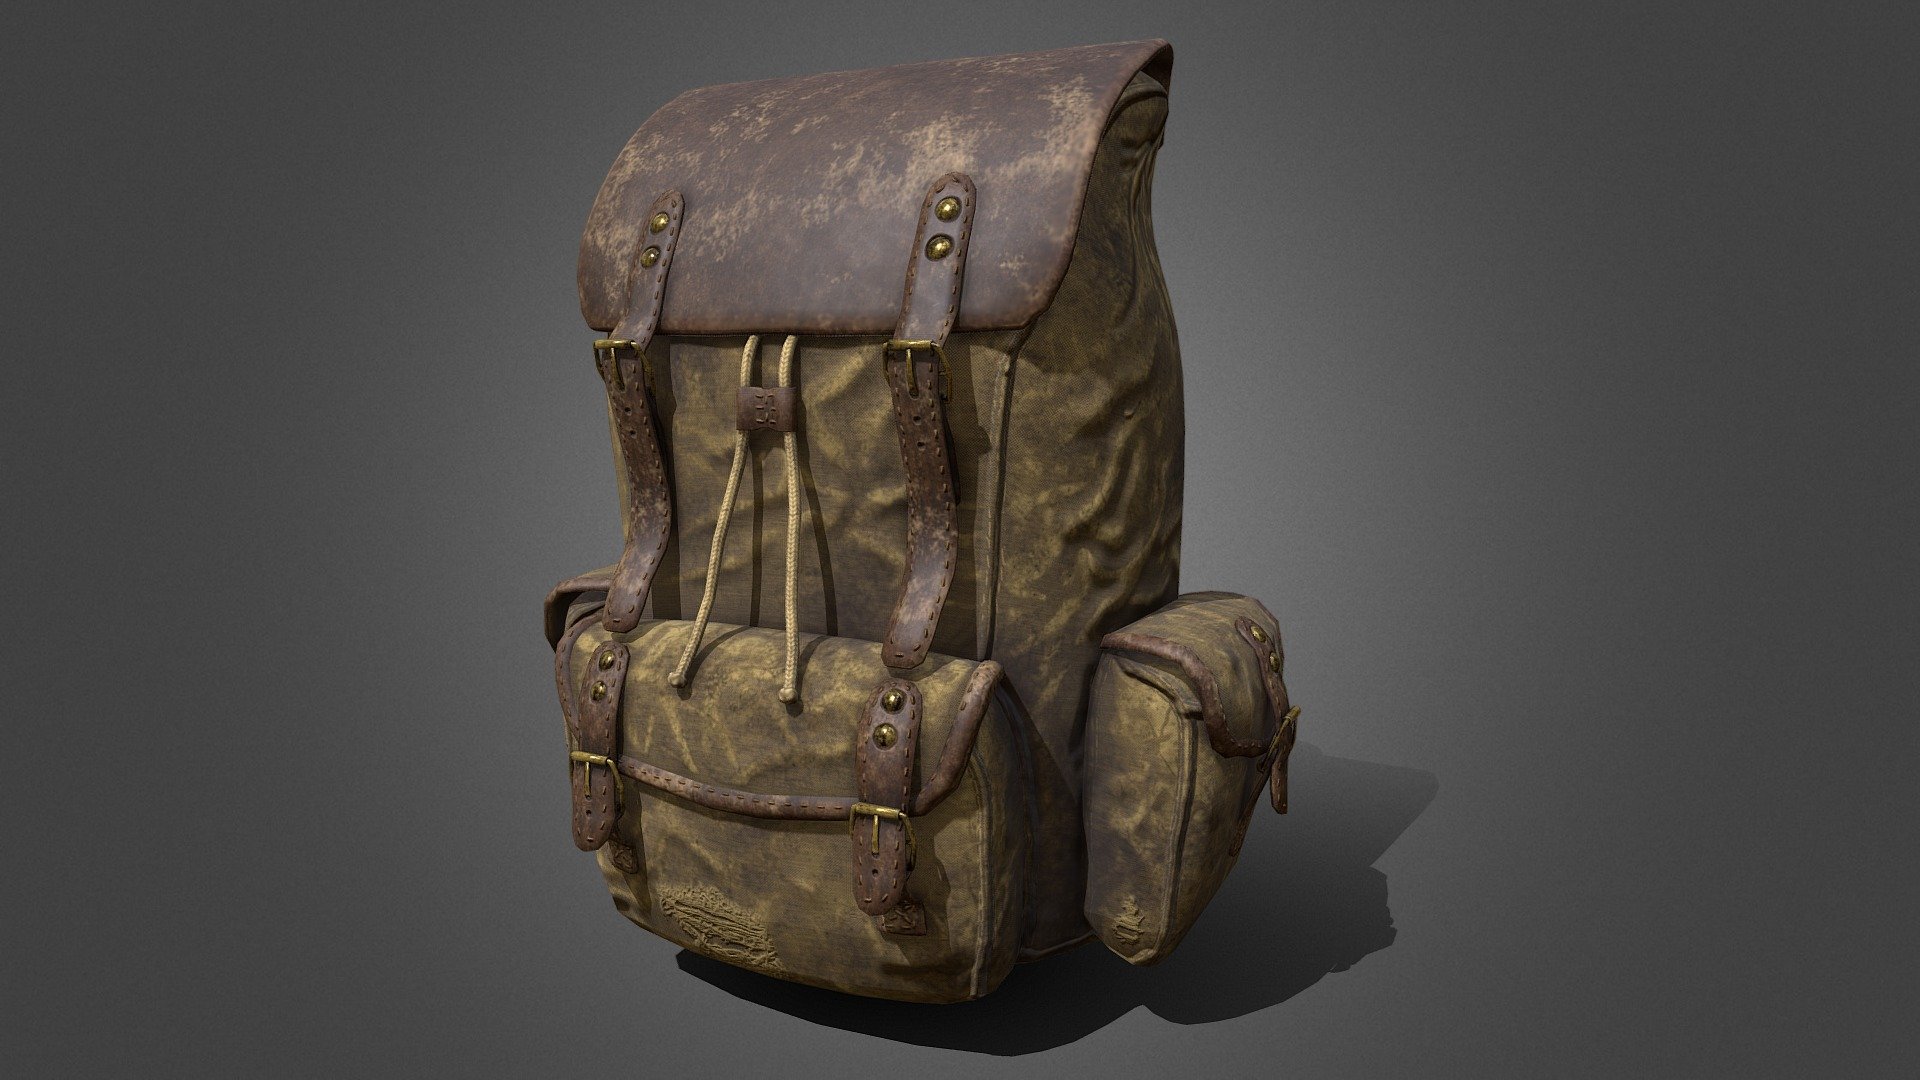 Tried to make a realistic-looking backpack that was lowpoly enough to work as a game asset.

Modelled in Blender, sculped in Zbrush and textured in Substance Painter 3d model